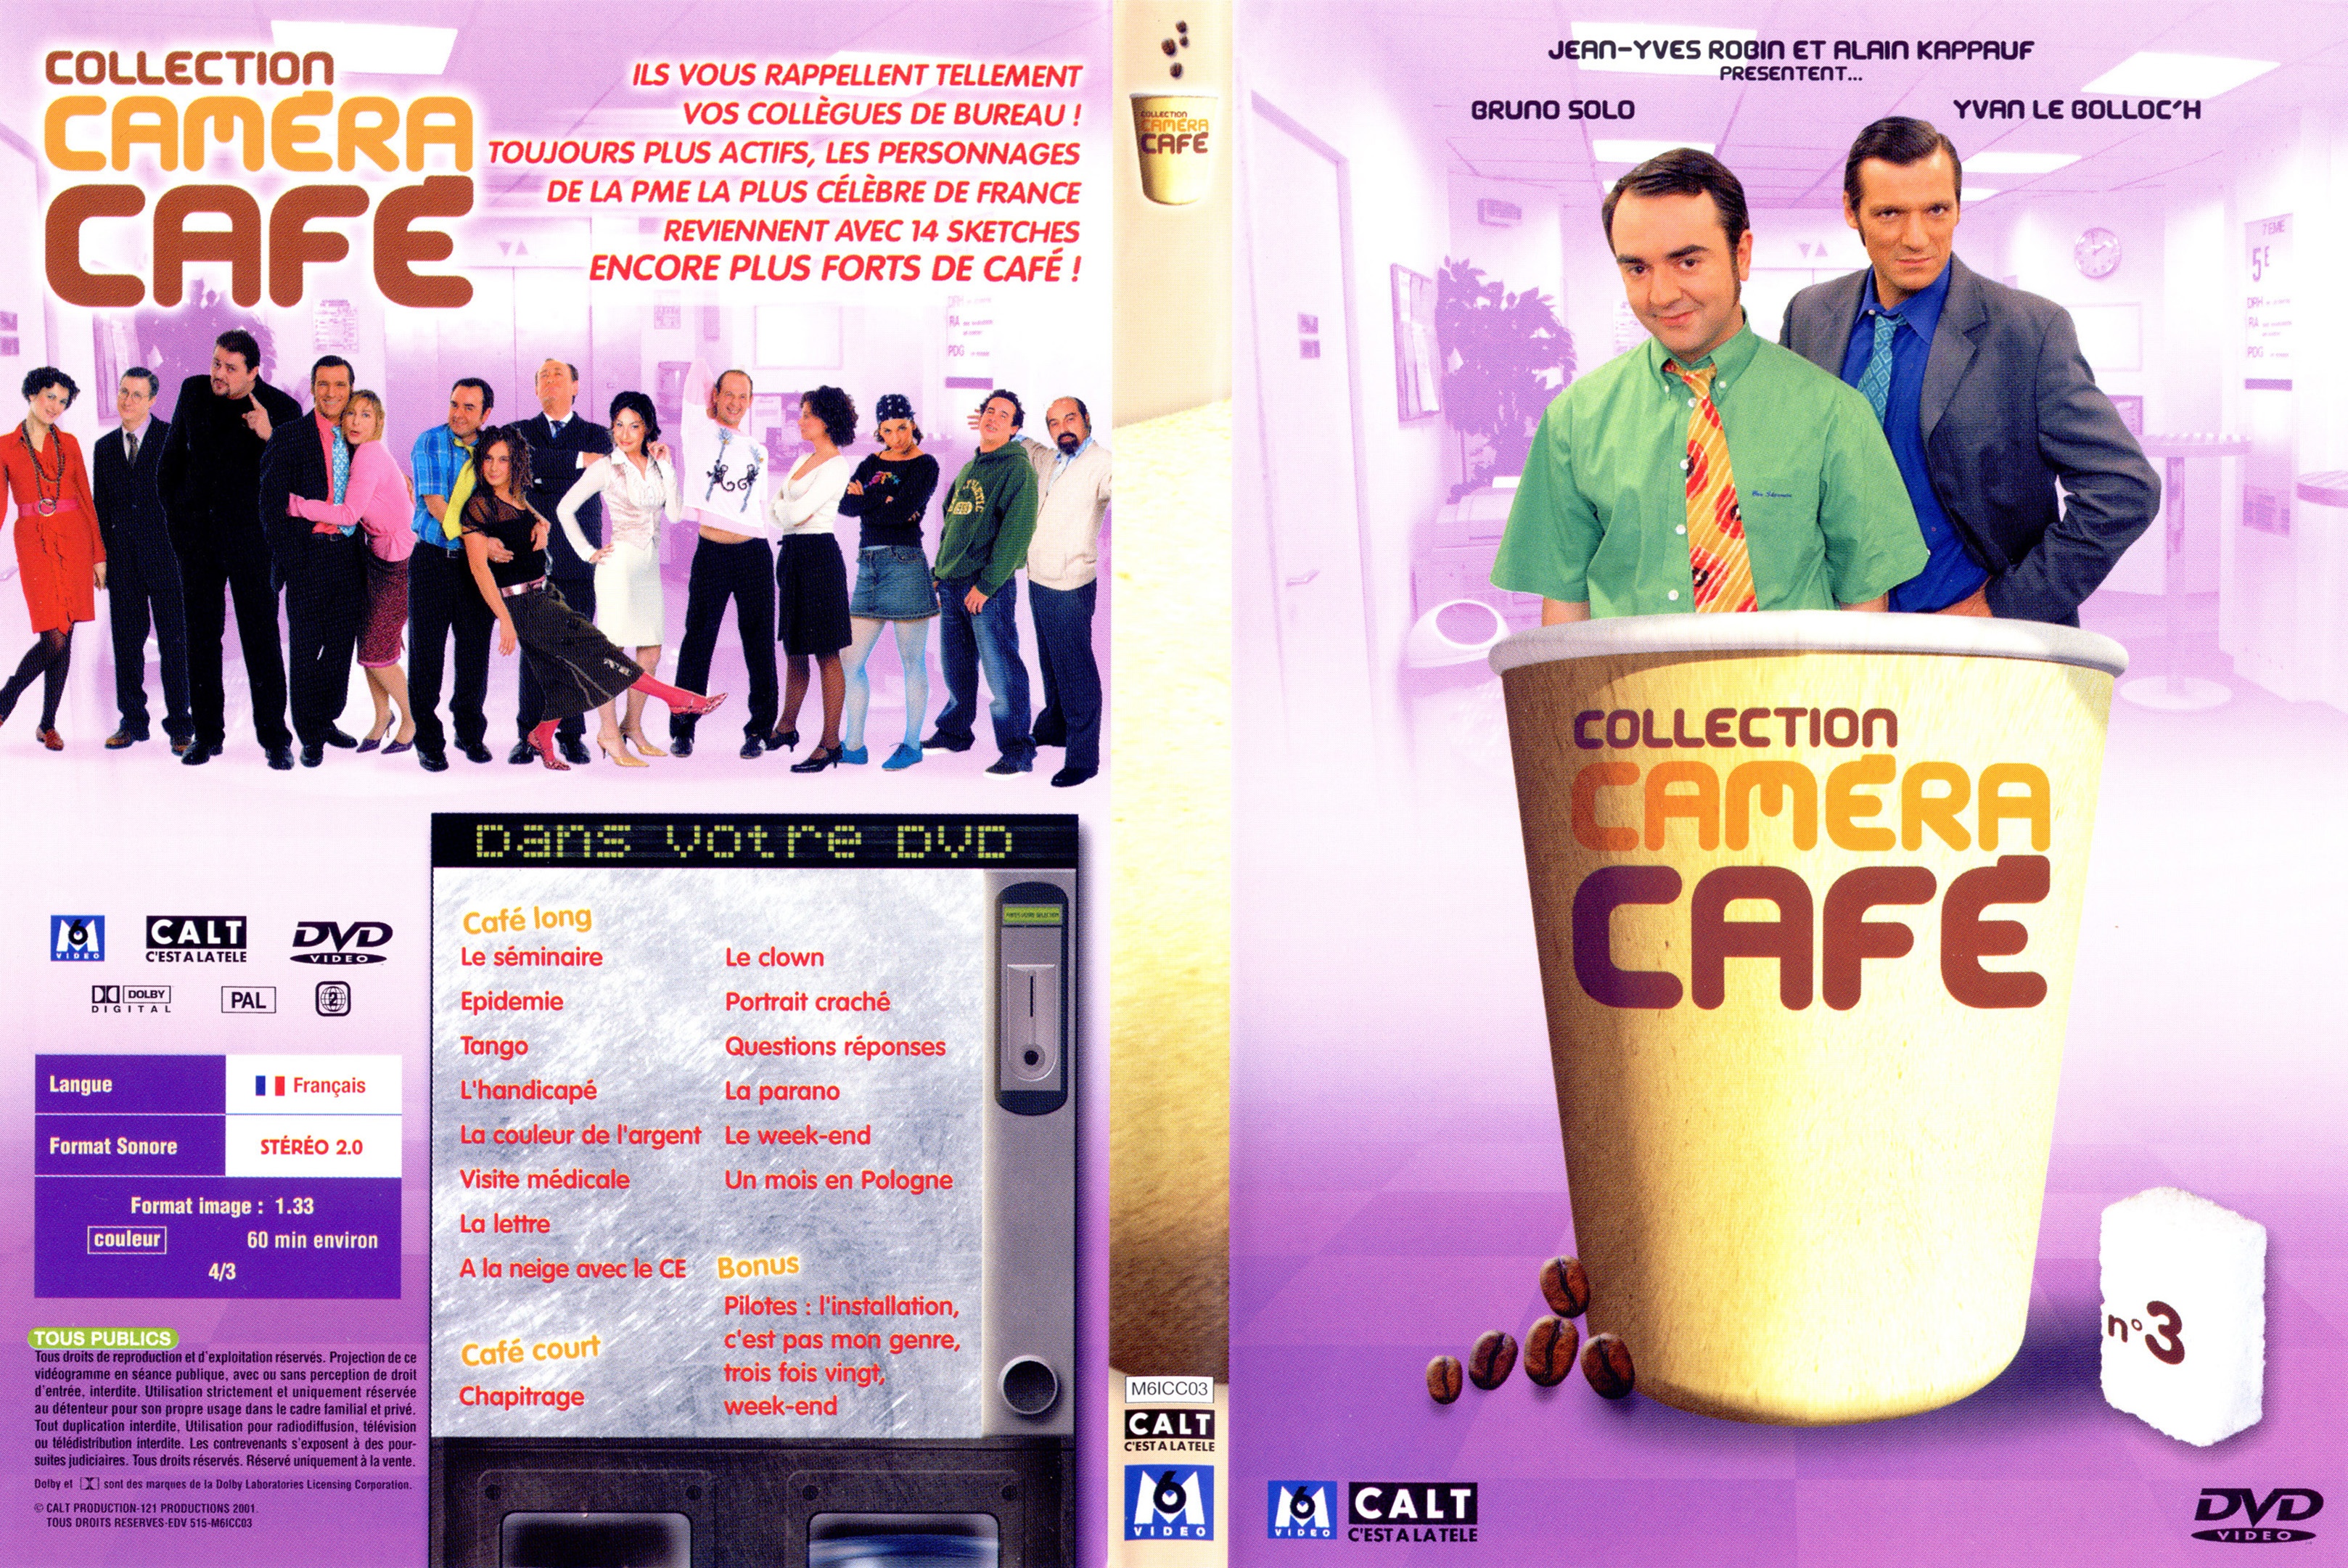 Jaquette DVD Collection Camera Cafe vol 03